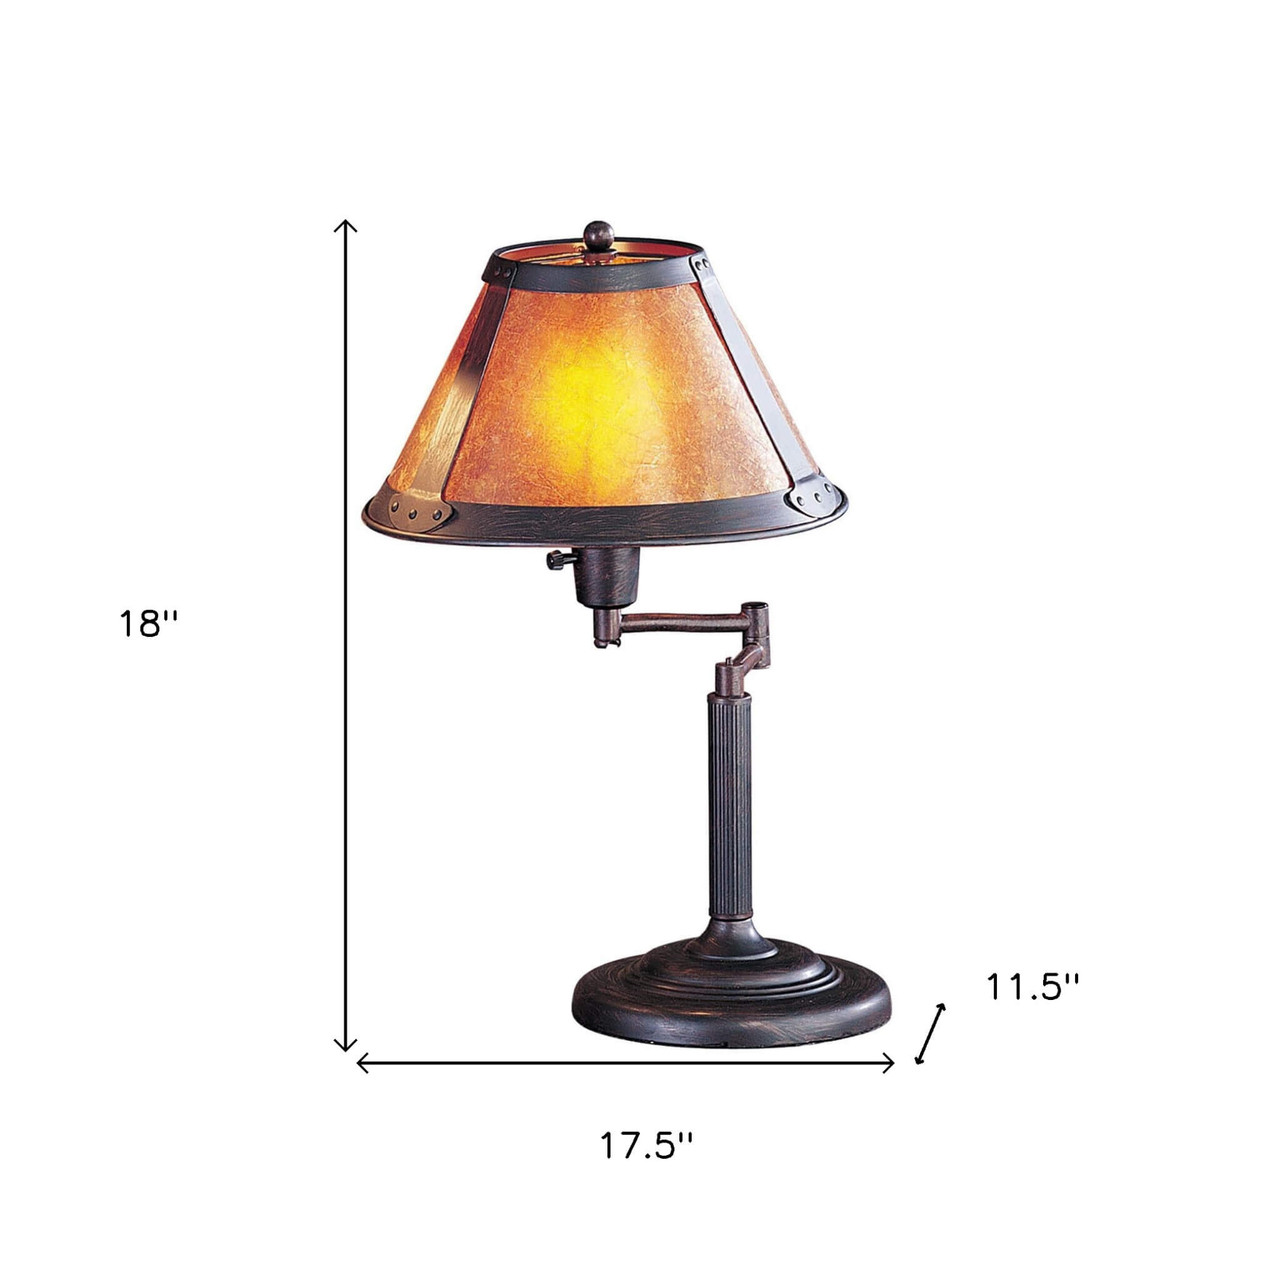 18" Rust Metal Table Lamp With Amber Empire Shade